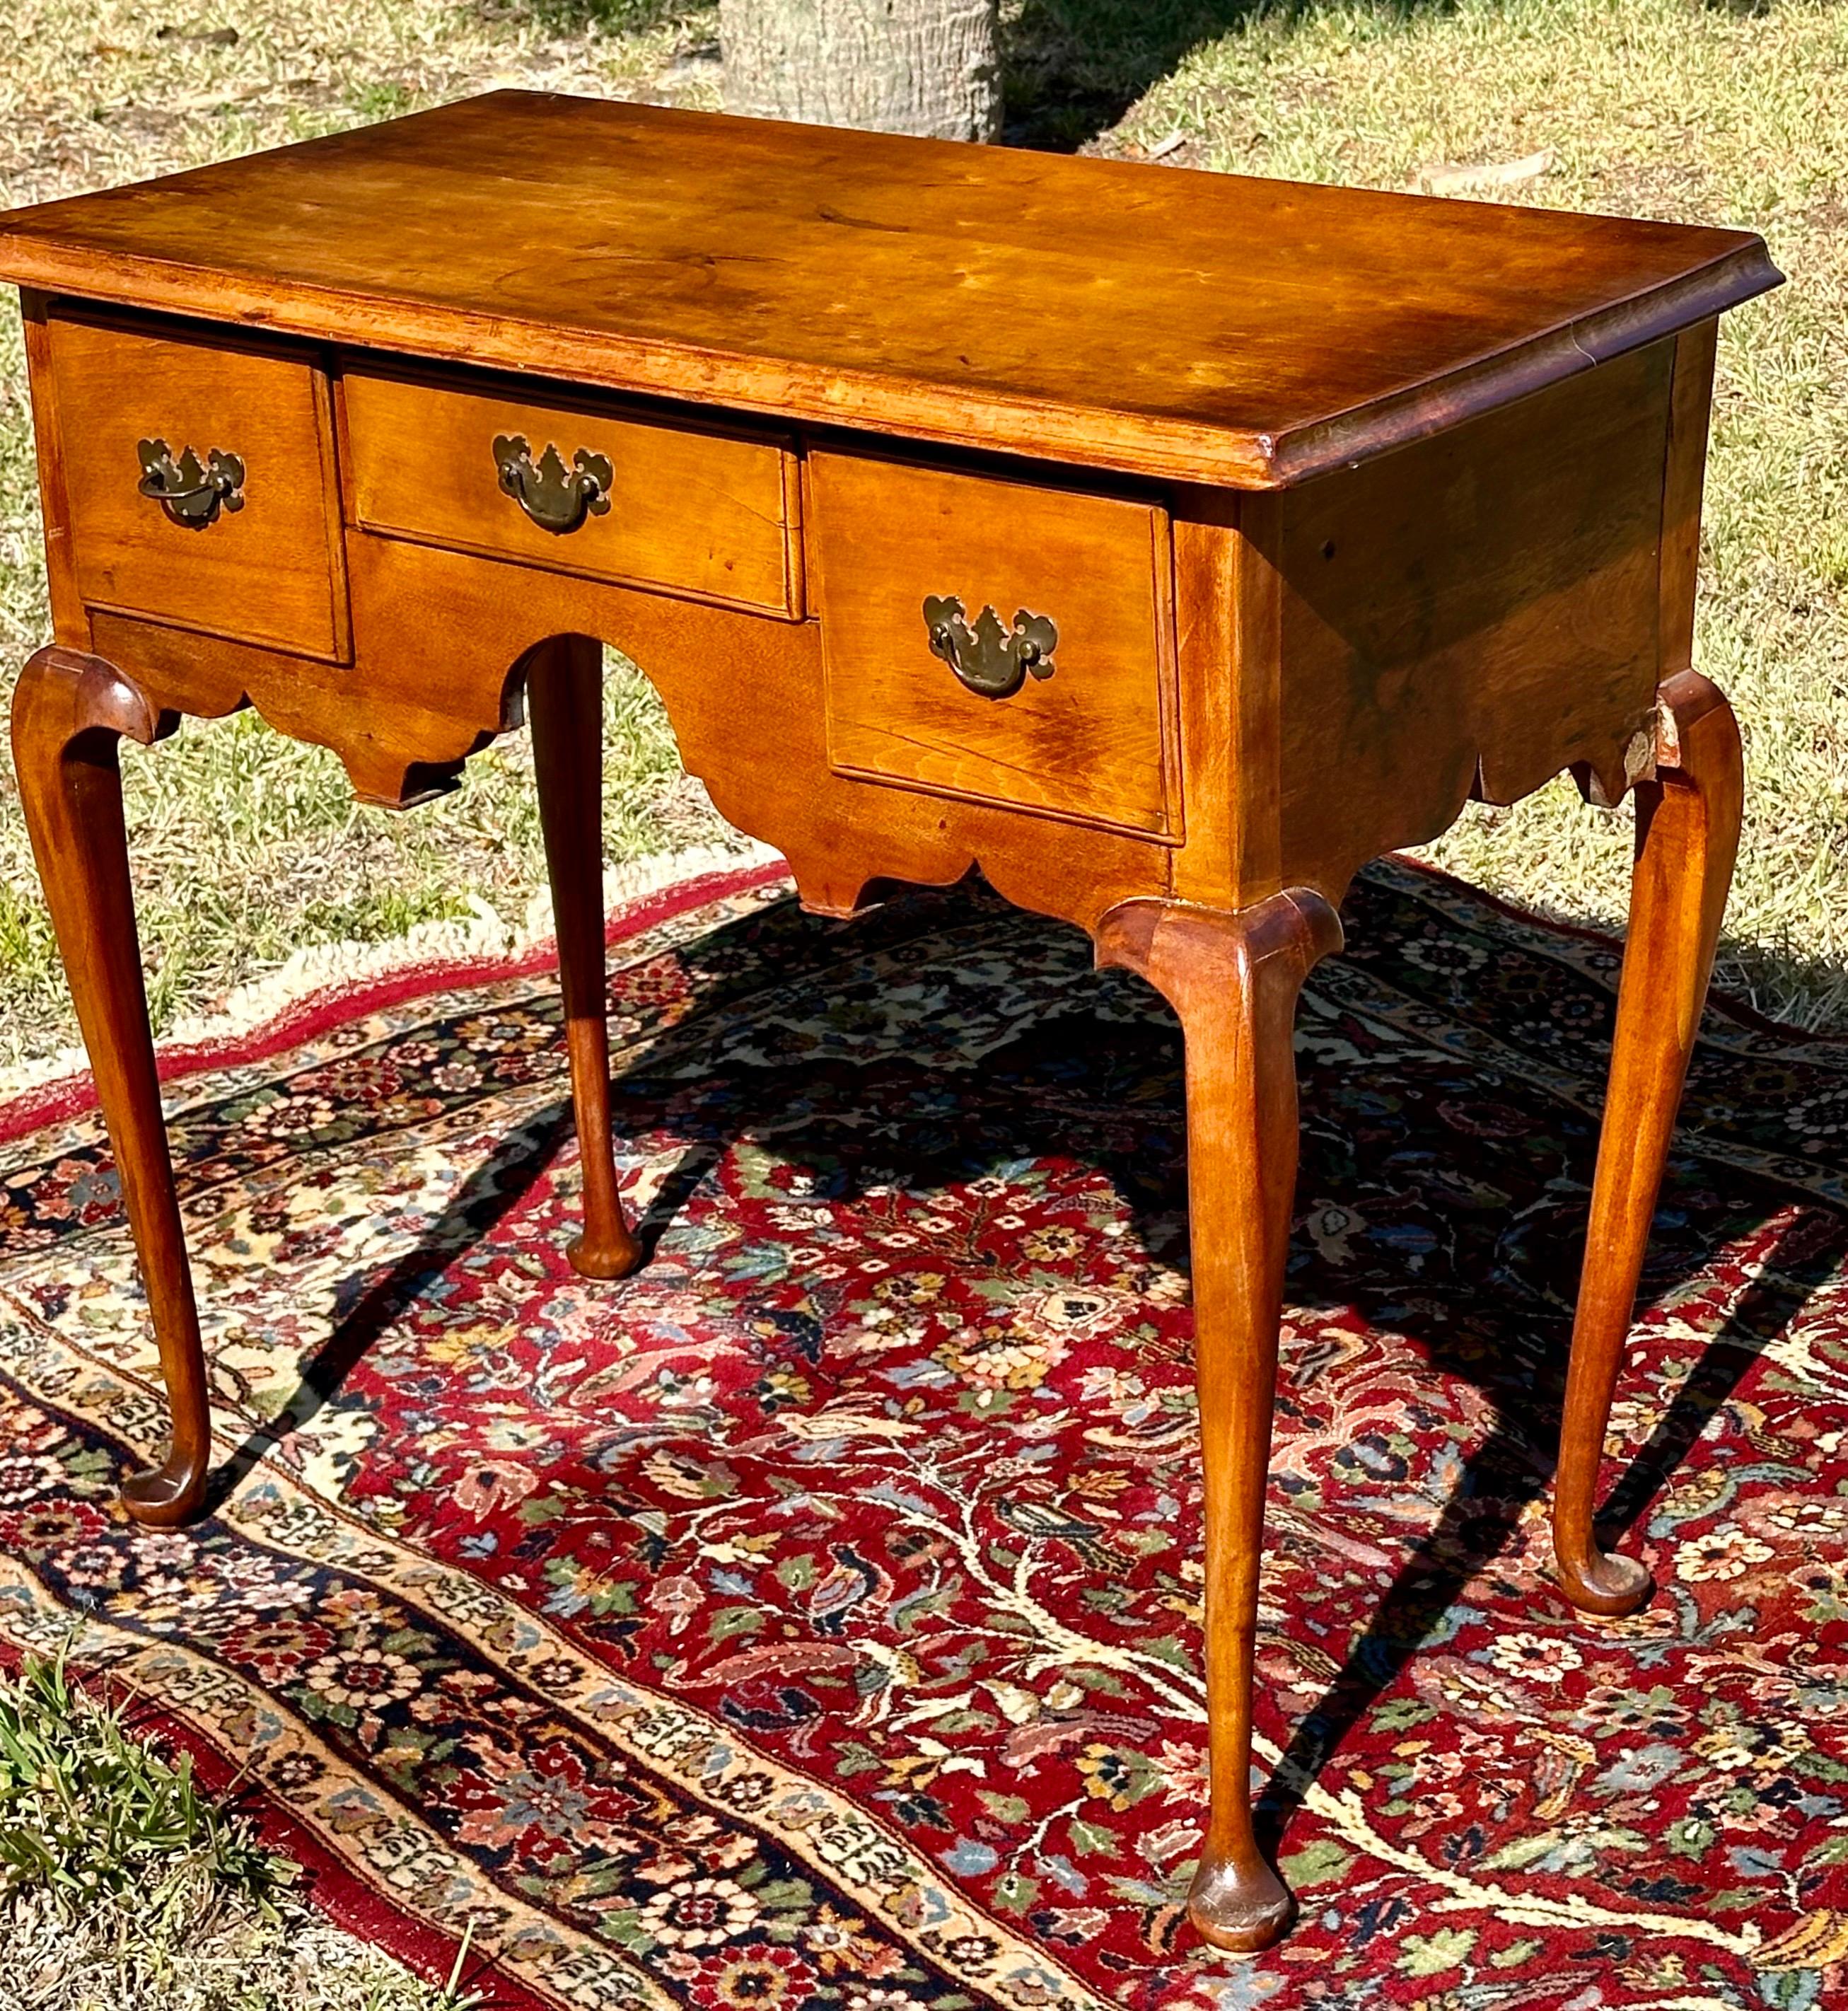 18th Century New England Queen Anne Cherry Lowboy

American cherry Lowboy with elegant scalloped apron from the Queen Anne period, about 1760. The top has a molded edge above three drawers. The center drawer is flanked by two deep drawers. The